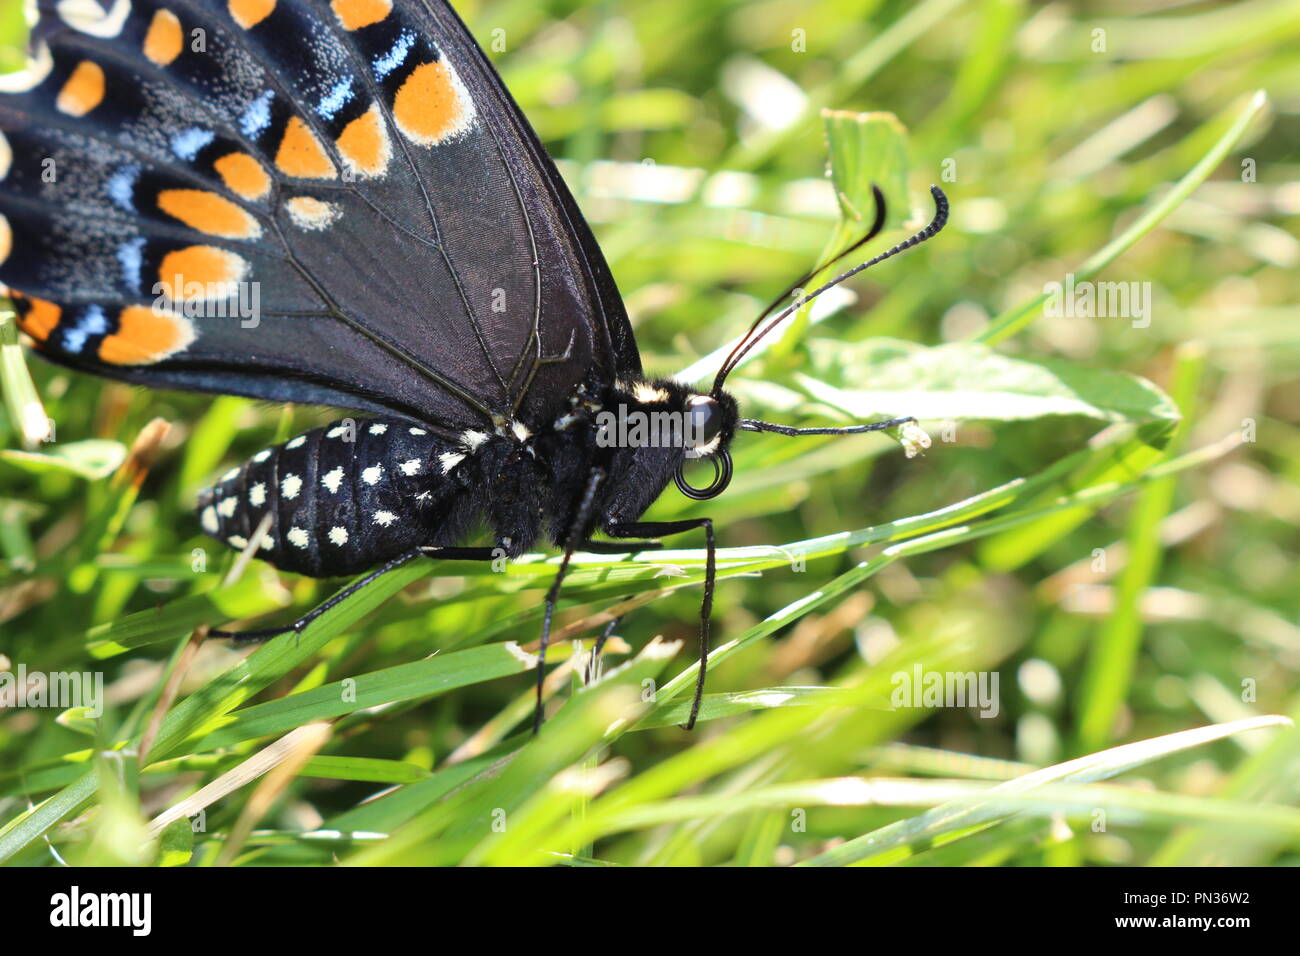 Swallowtail butterfly Banque D'Images